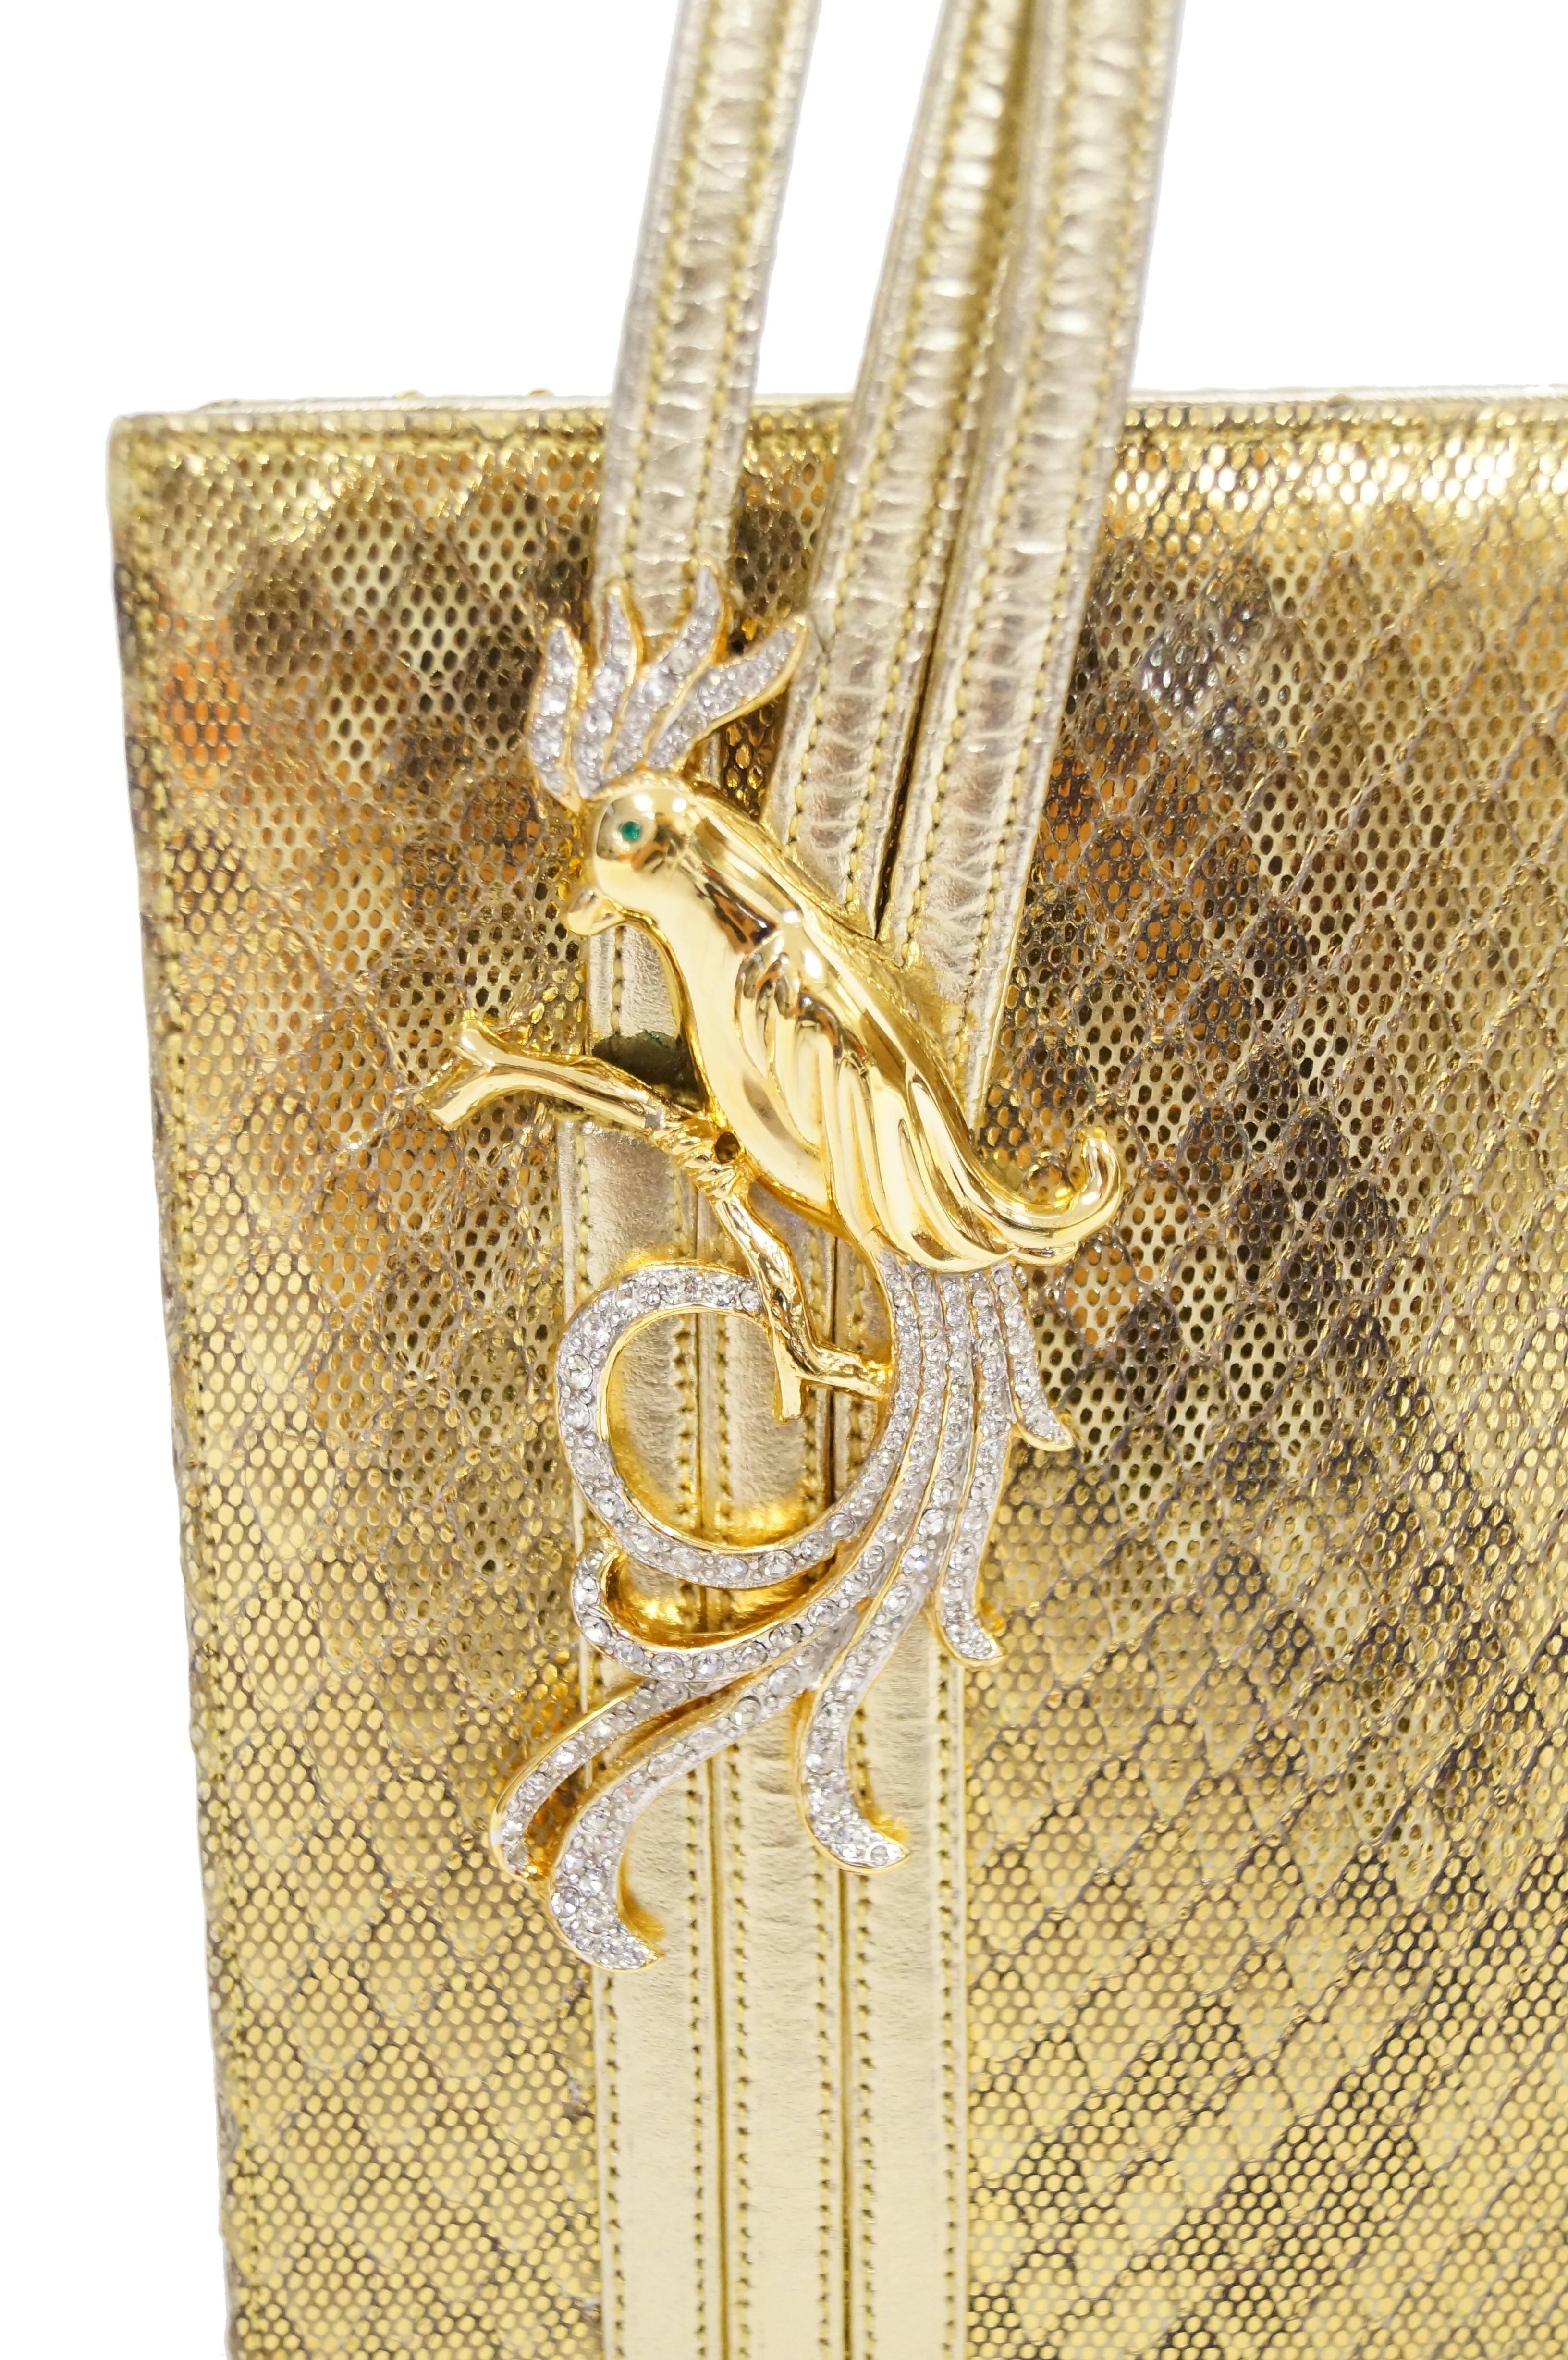 Elegant gold lame snakeskin evening bag by Martin Van Schaak! The handbag has a structured rectangular body, with a triple band handle that loops over from the front to the back. The handle is accented by a gold tone phoenix bird with clear